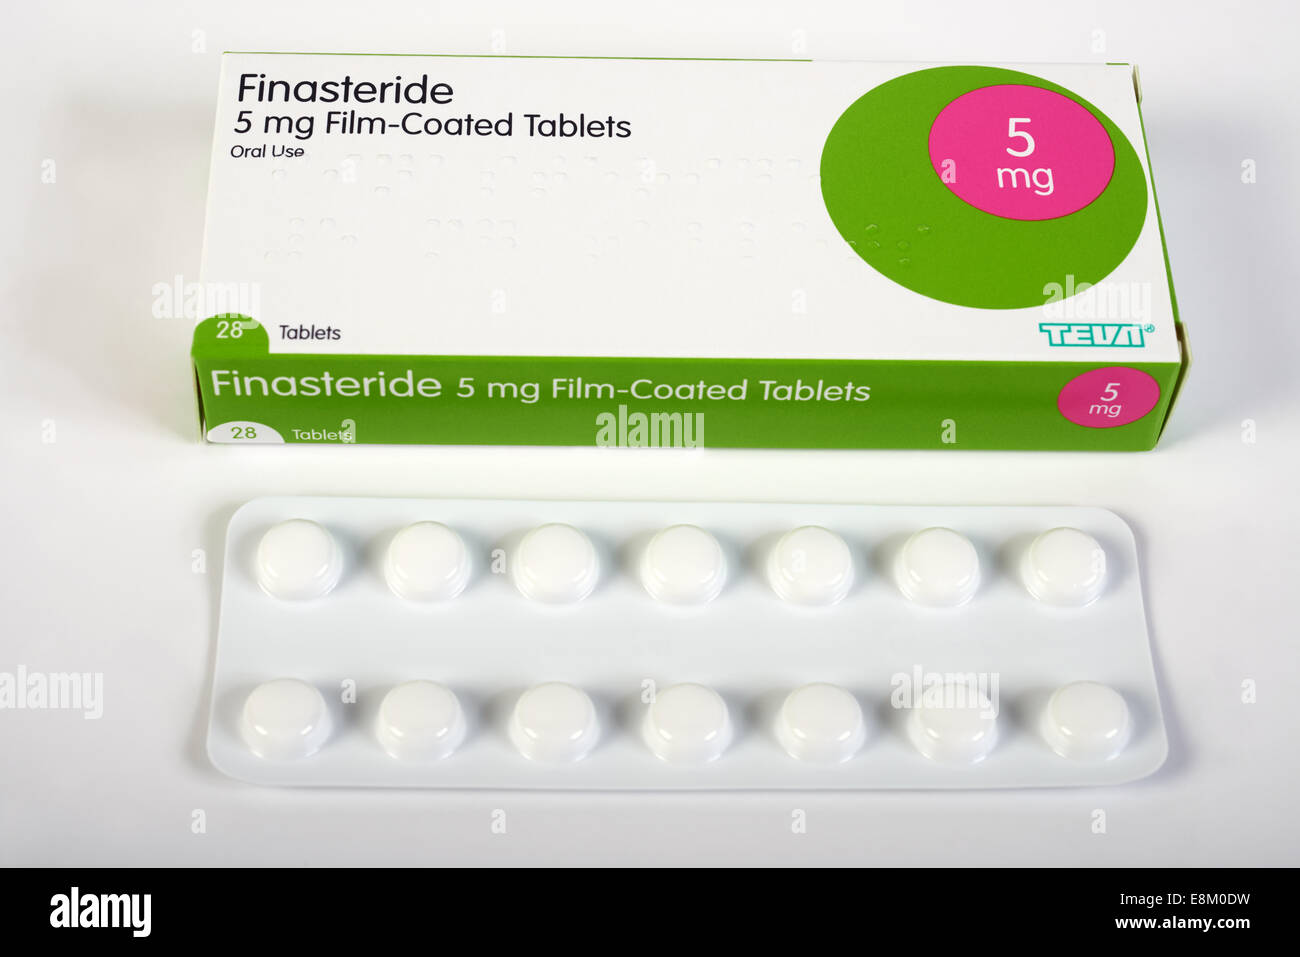 what is finasteride medication used for